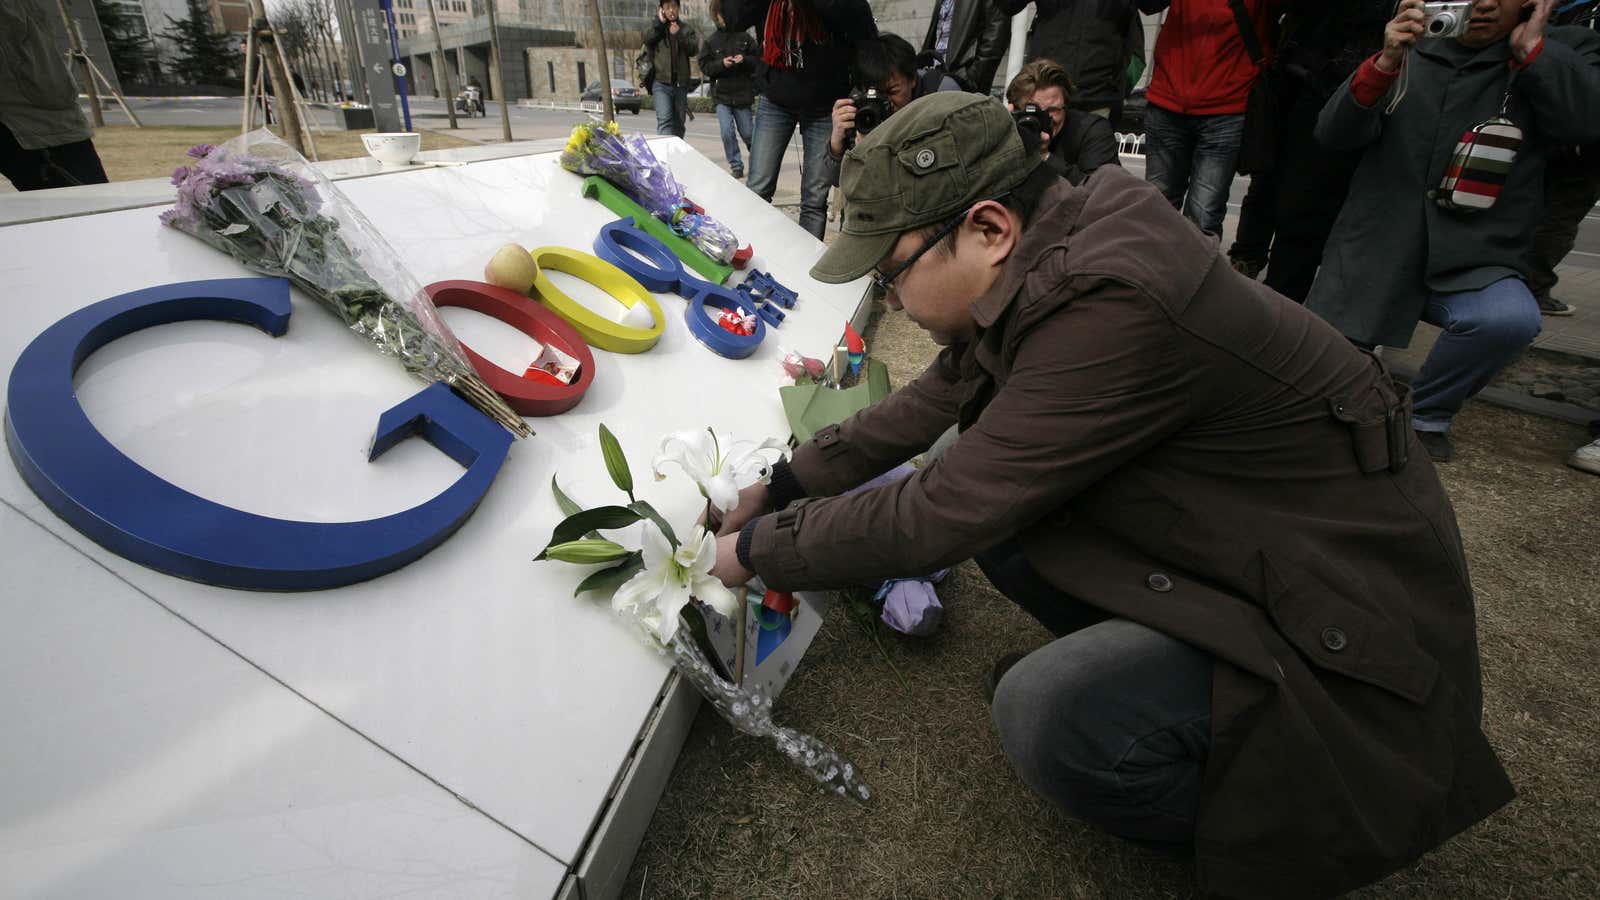 Loyal Google users place flowers at the company’s headquarters in Beijing around the time of its China exit.